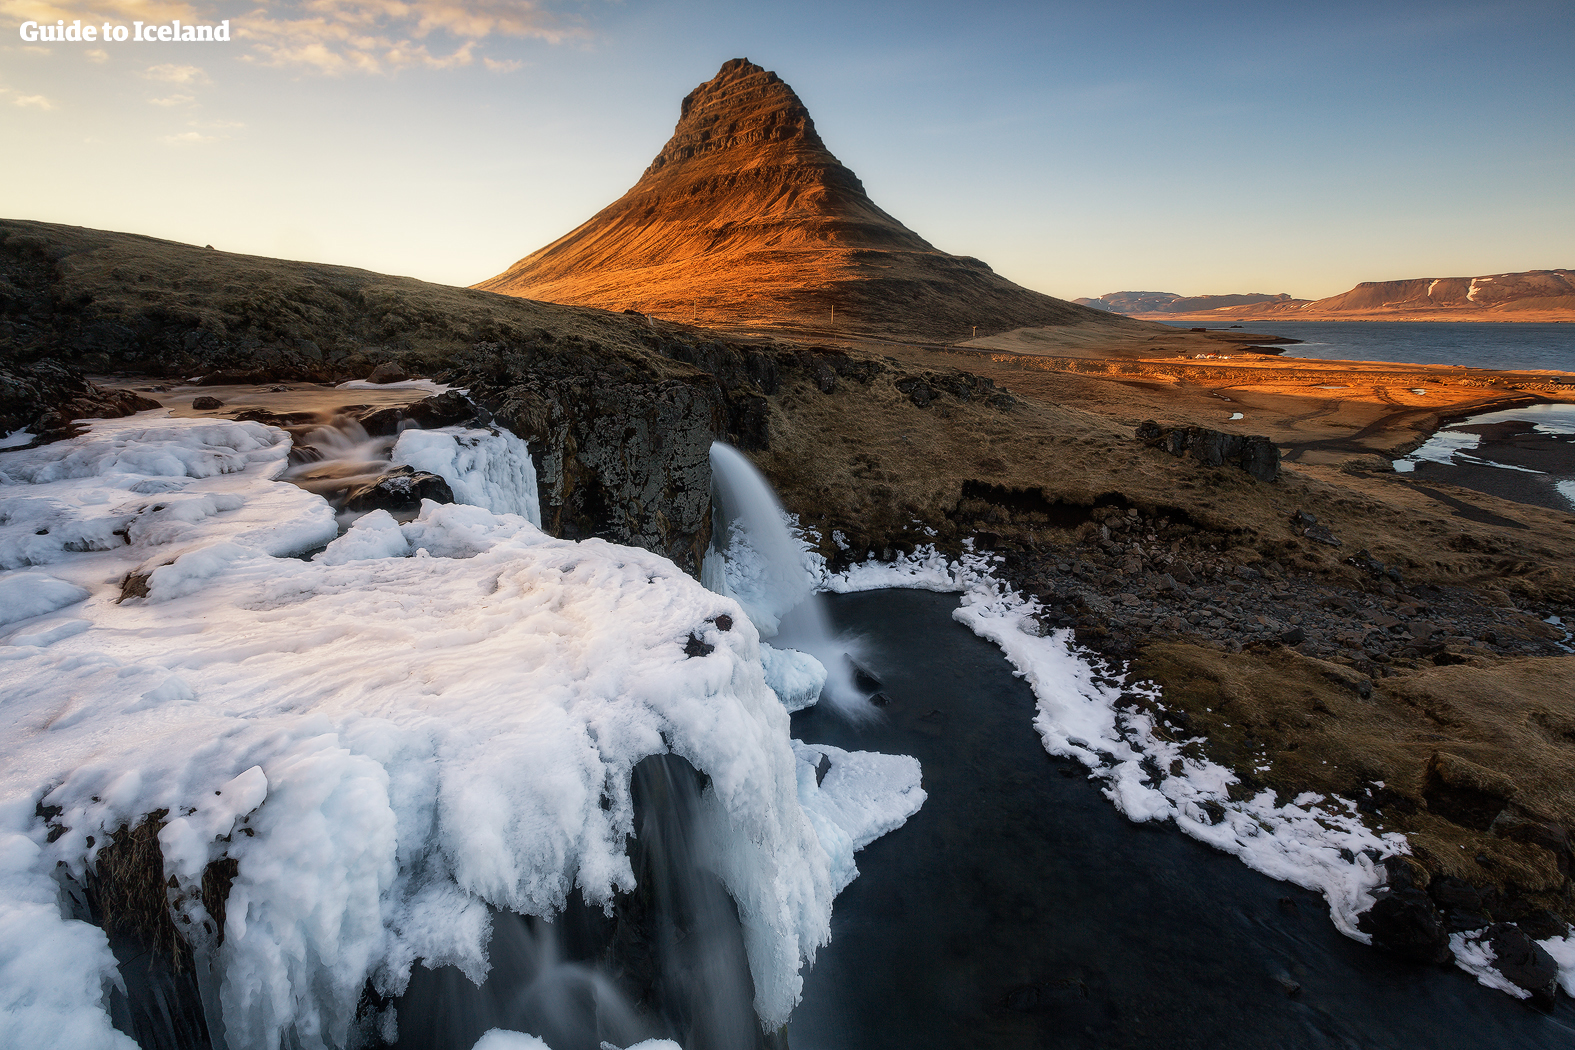 Travel to the beautiful Snæfellsnes Peninsula and see stunning attractions such as Kirkjufell Mountain.